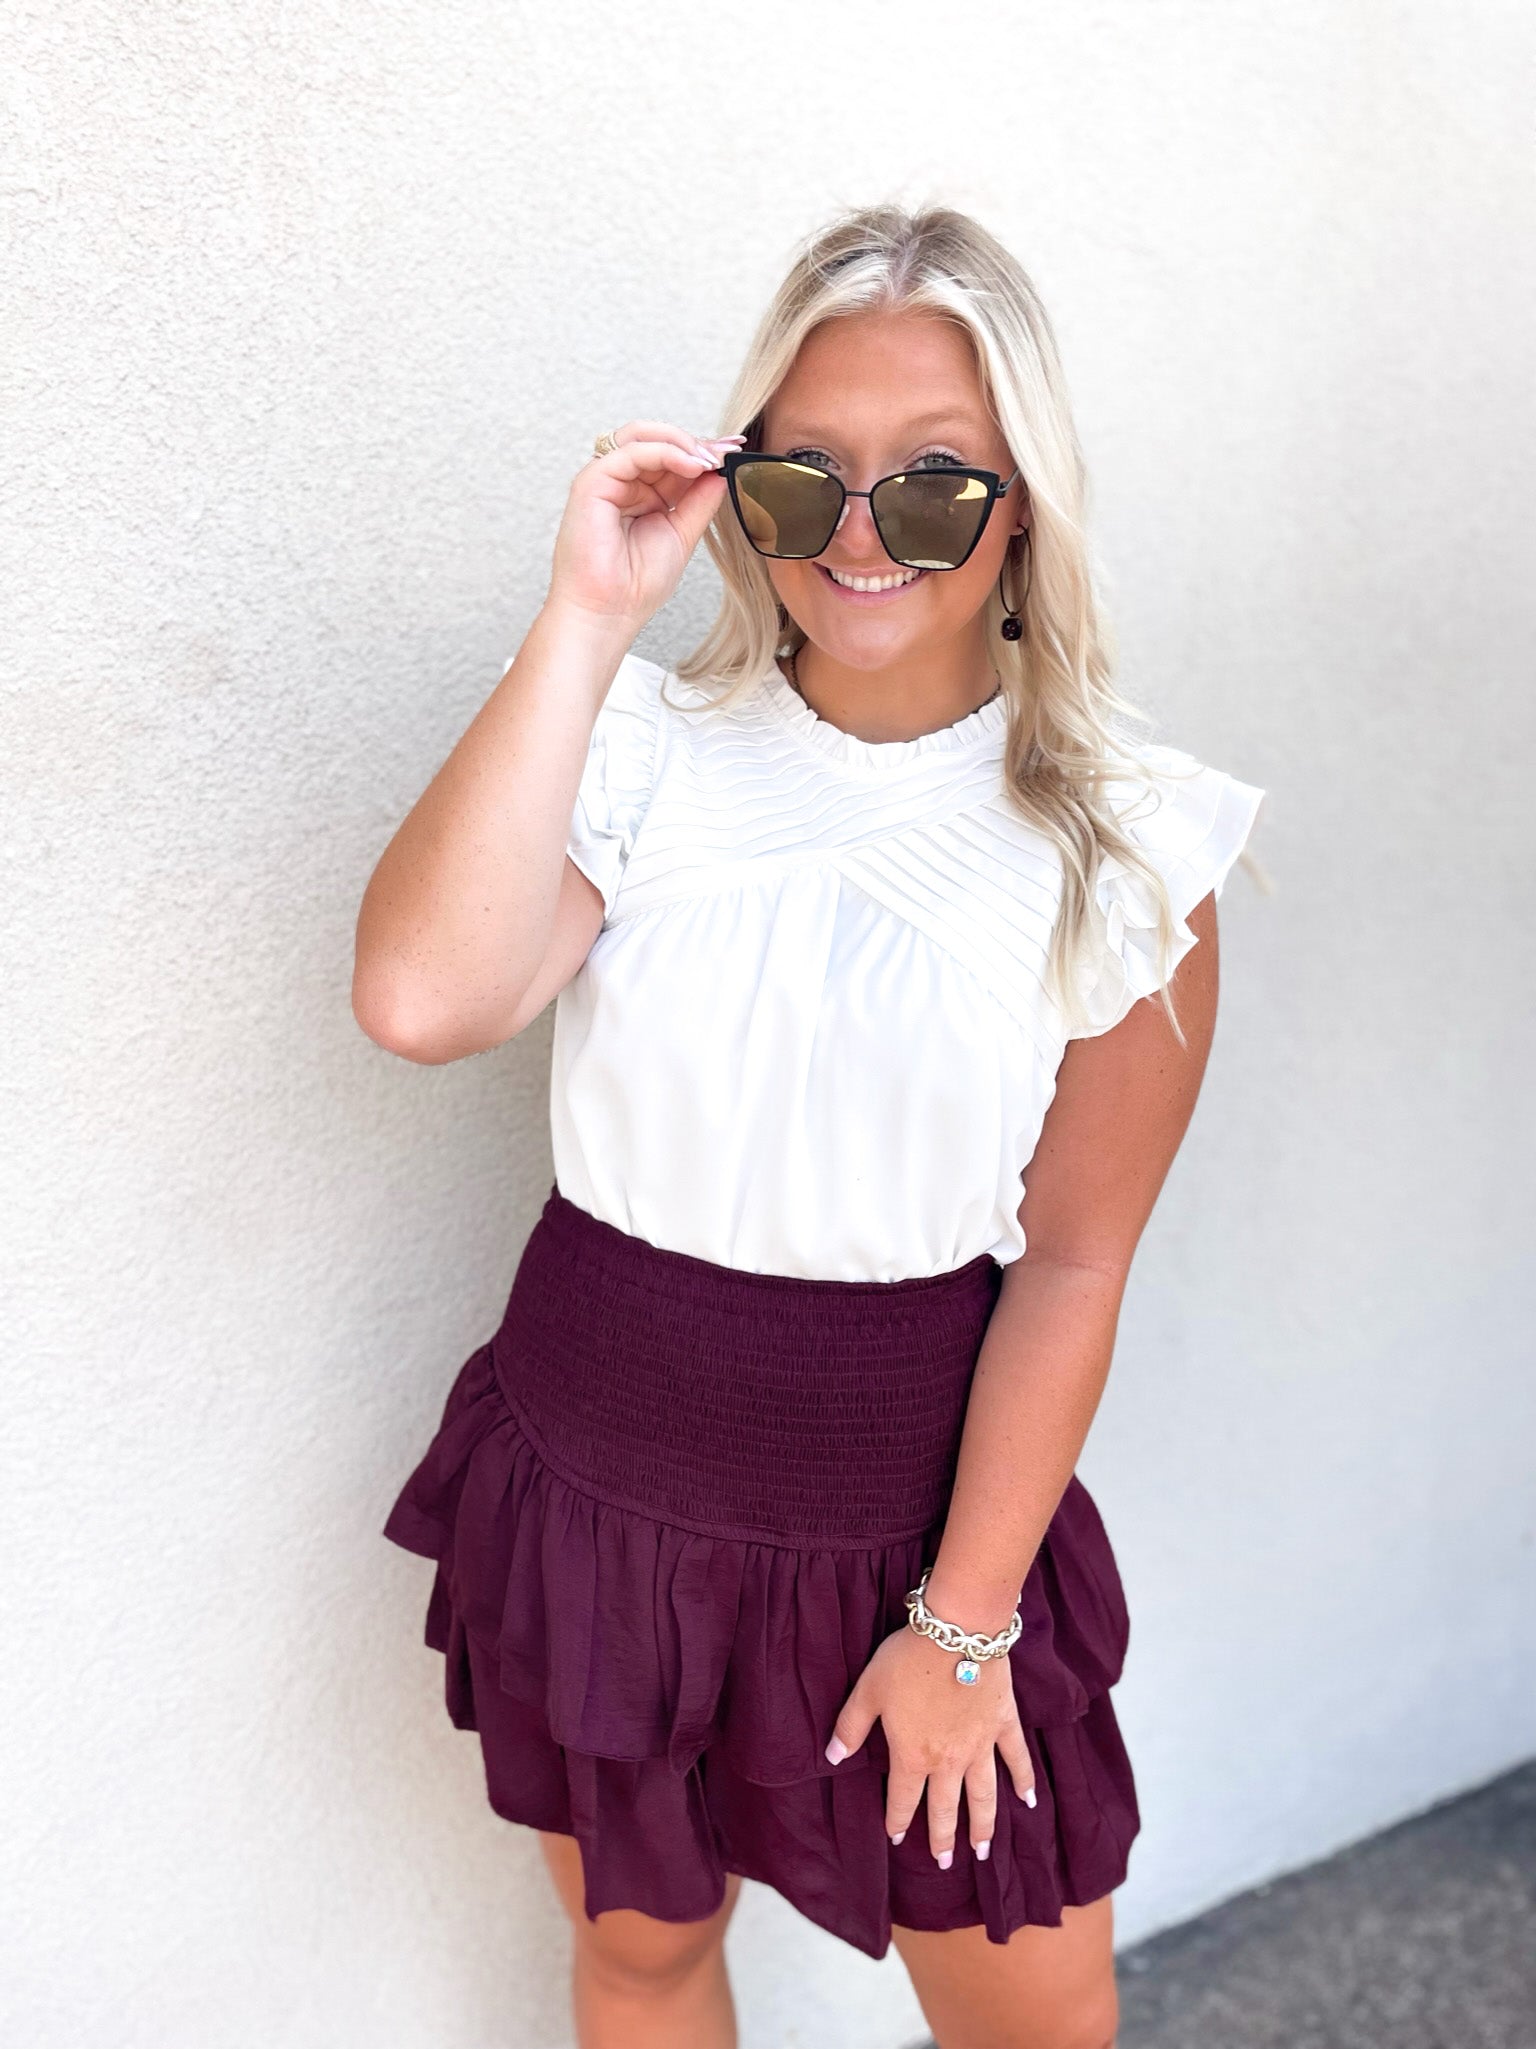 Expect The Best Pleated Upper Blouse with Ruffle Cap Sleeves in White - Giddy Up Glamour Boutique